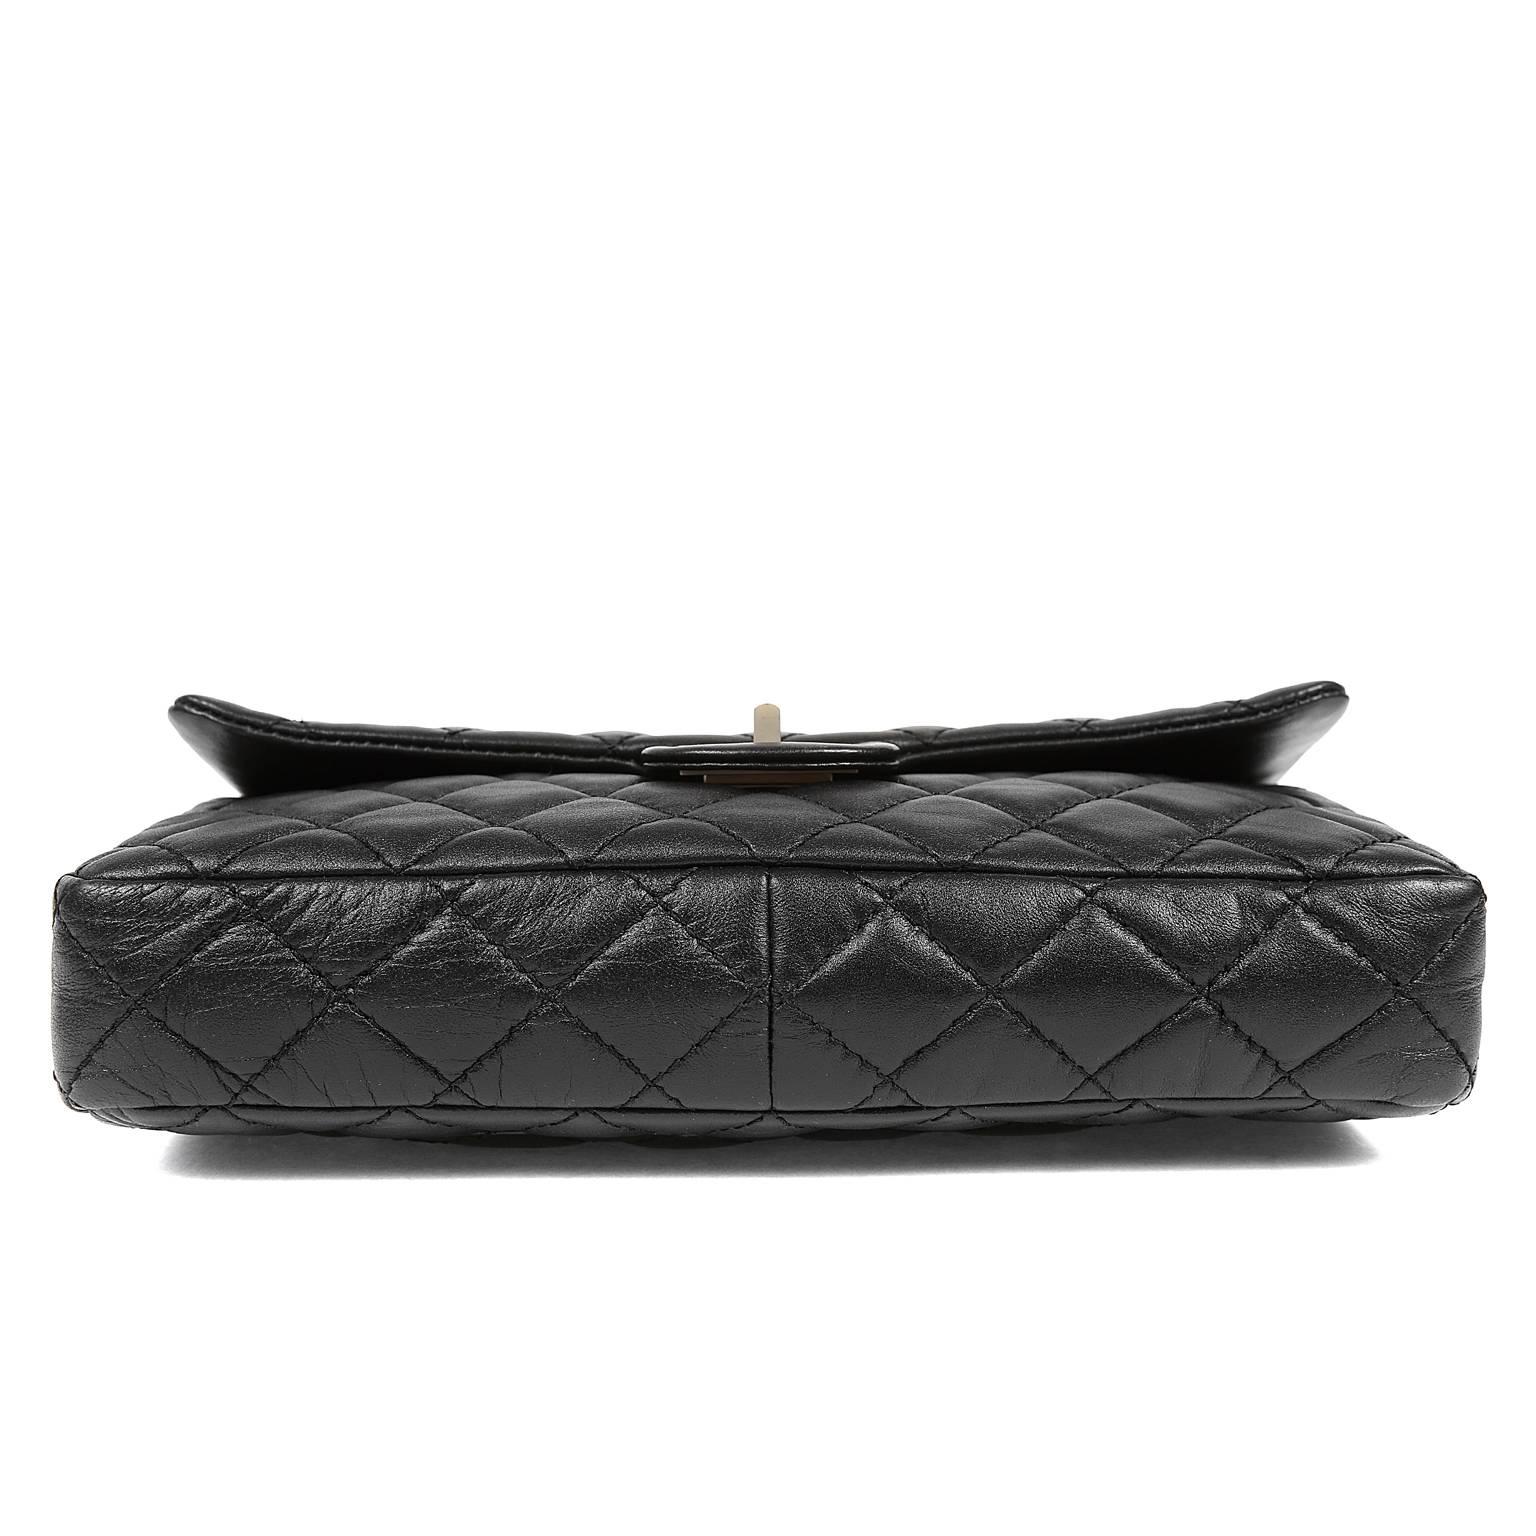 Women's Chanel Black Quilted Leather Mademoiselle Flap Bag For Sale